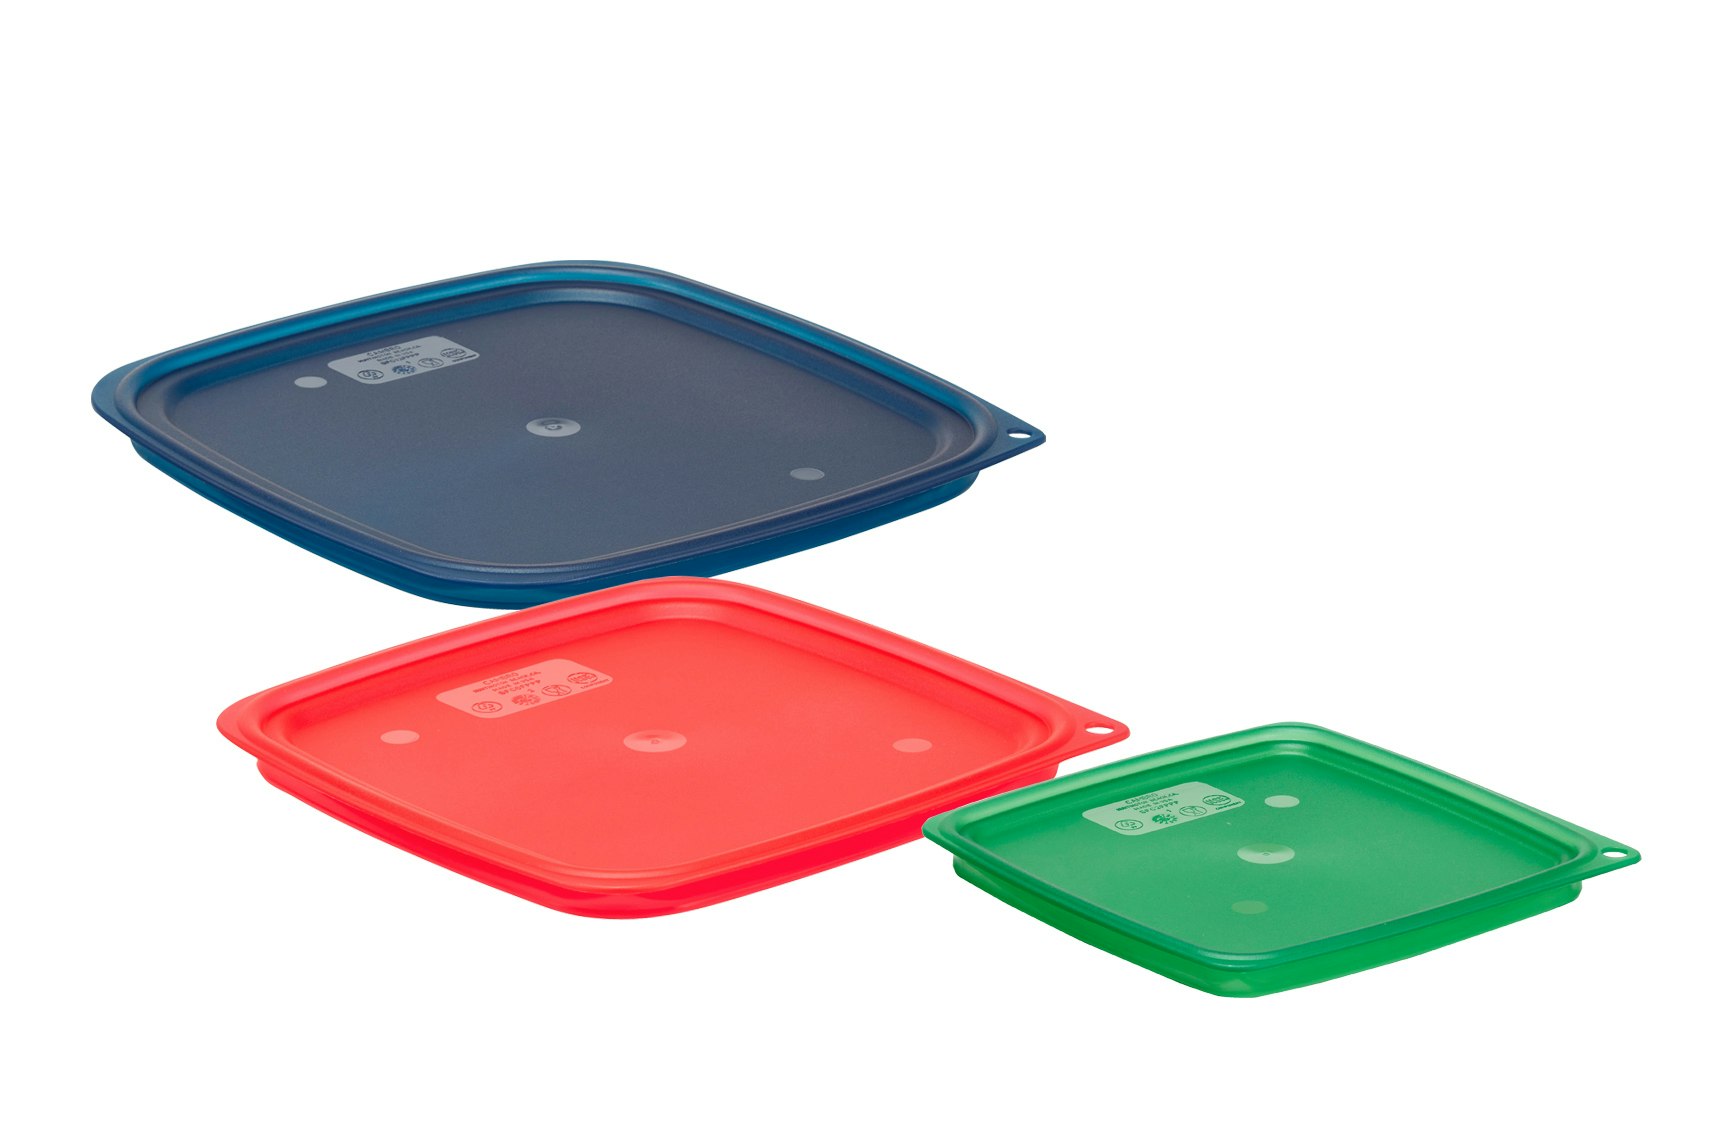 Rubbermaid Containers & Lids, Large Rectangles, 1.1 Gallon 2 Ea, Plastic  Containers